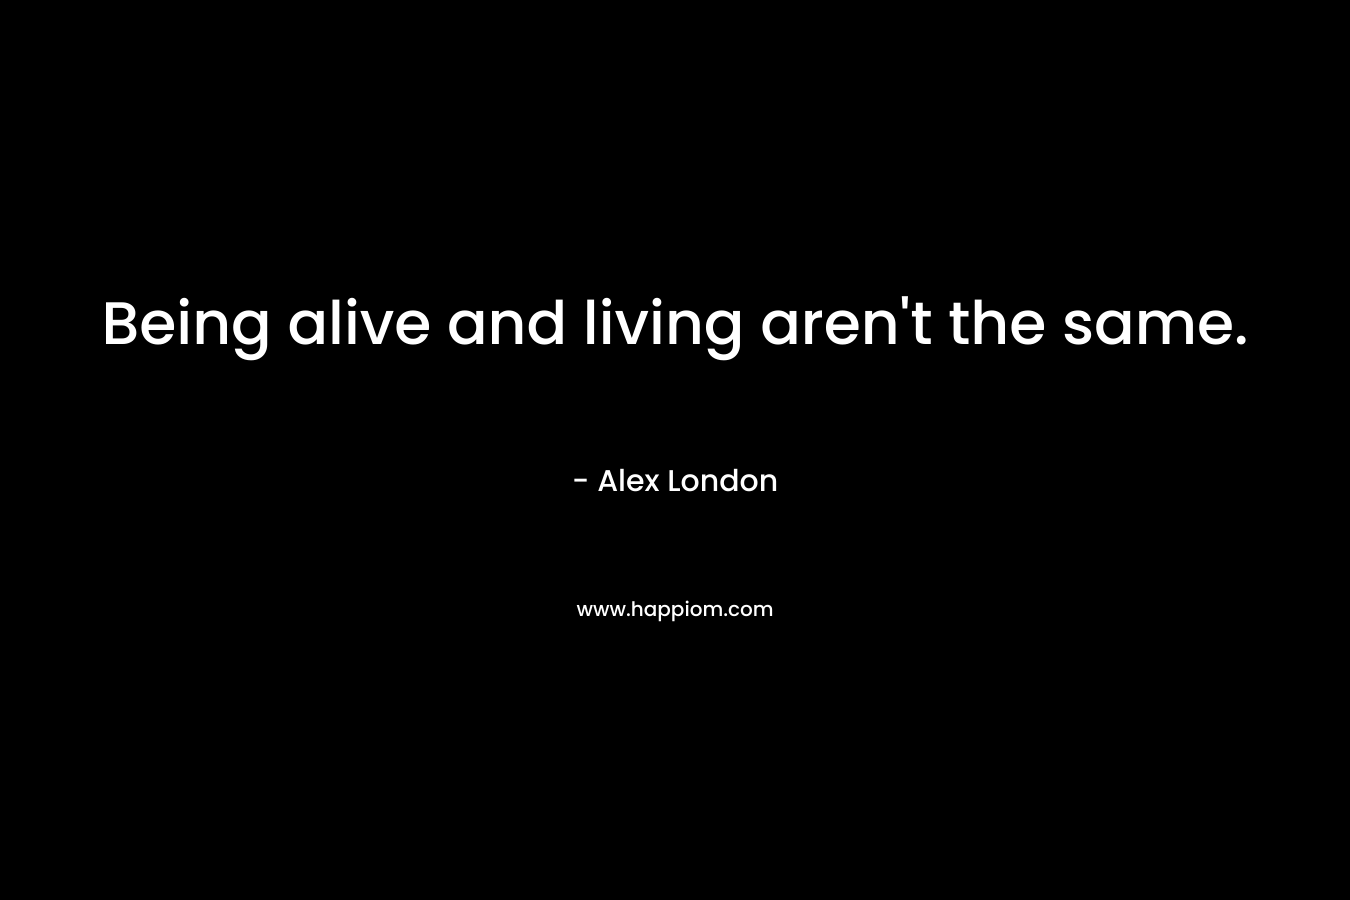 Being alive and living aren't the same.